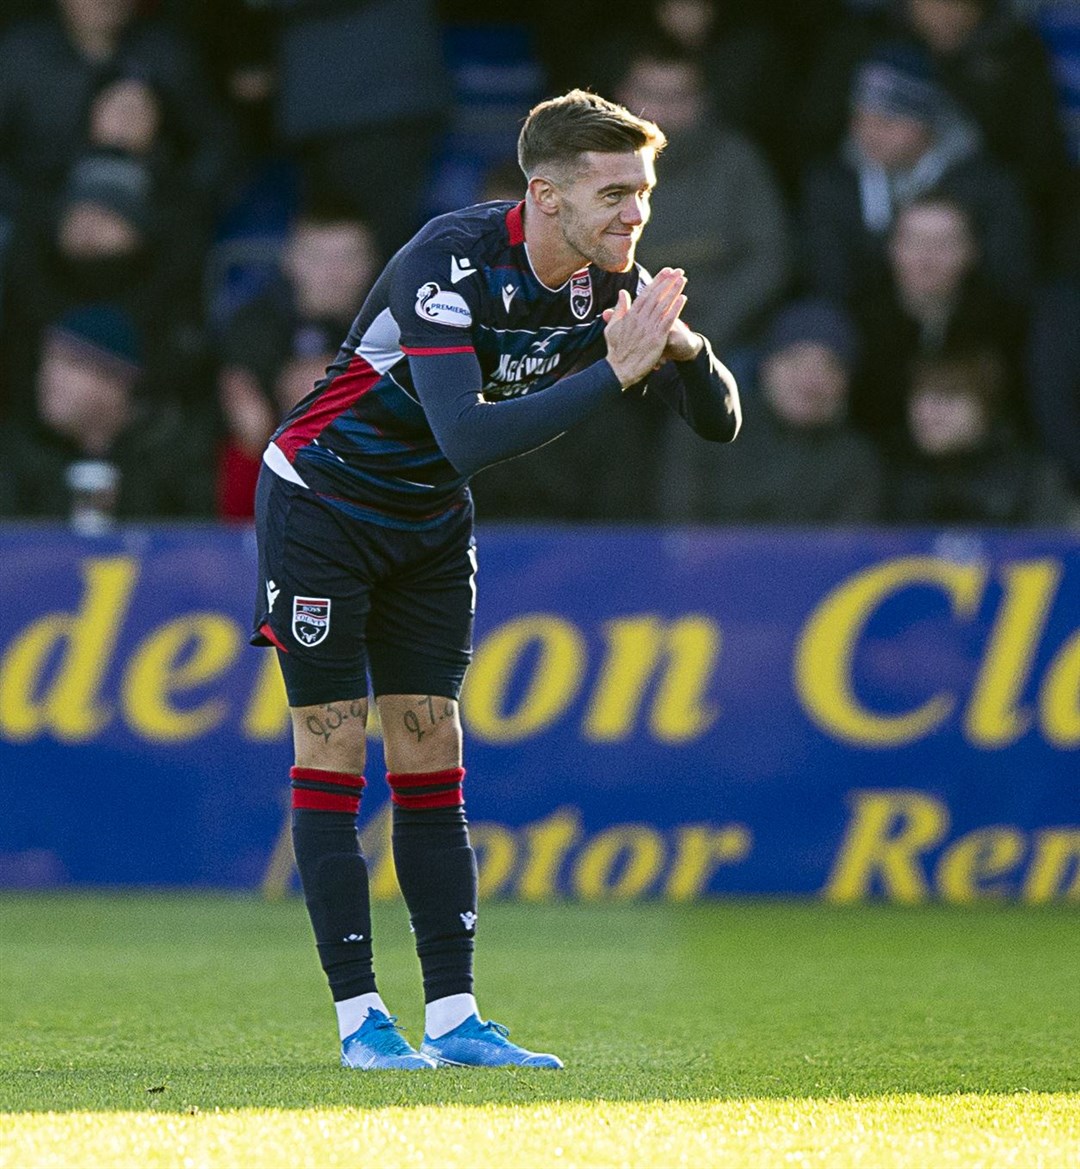 Picture - Ken Macpherson, Inverness. Ross County(1) v Aberdeen(3). 09/11/19. Ross County's Josh Mullin celebrates his goal.